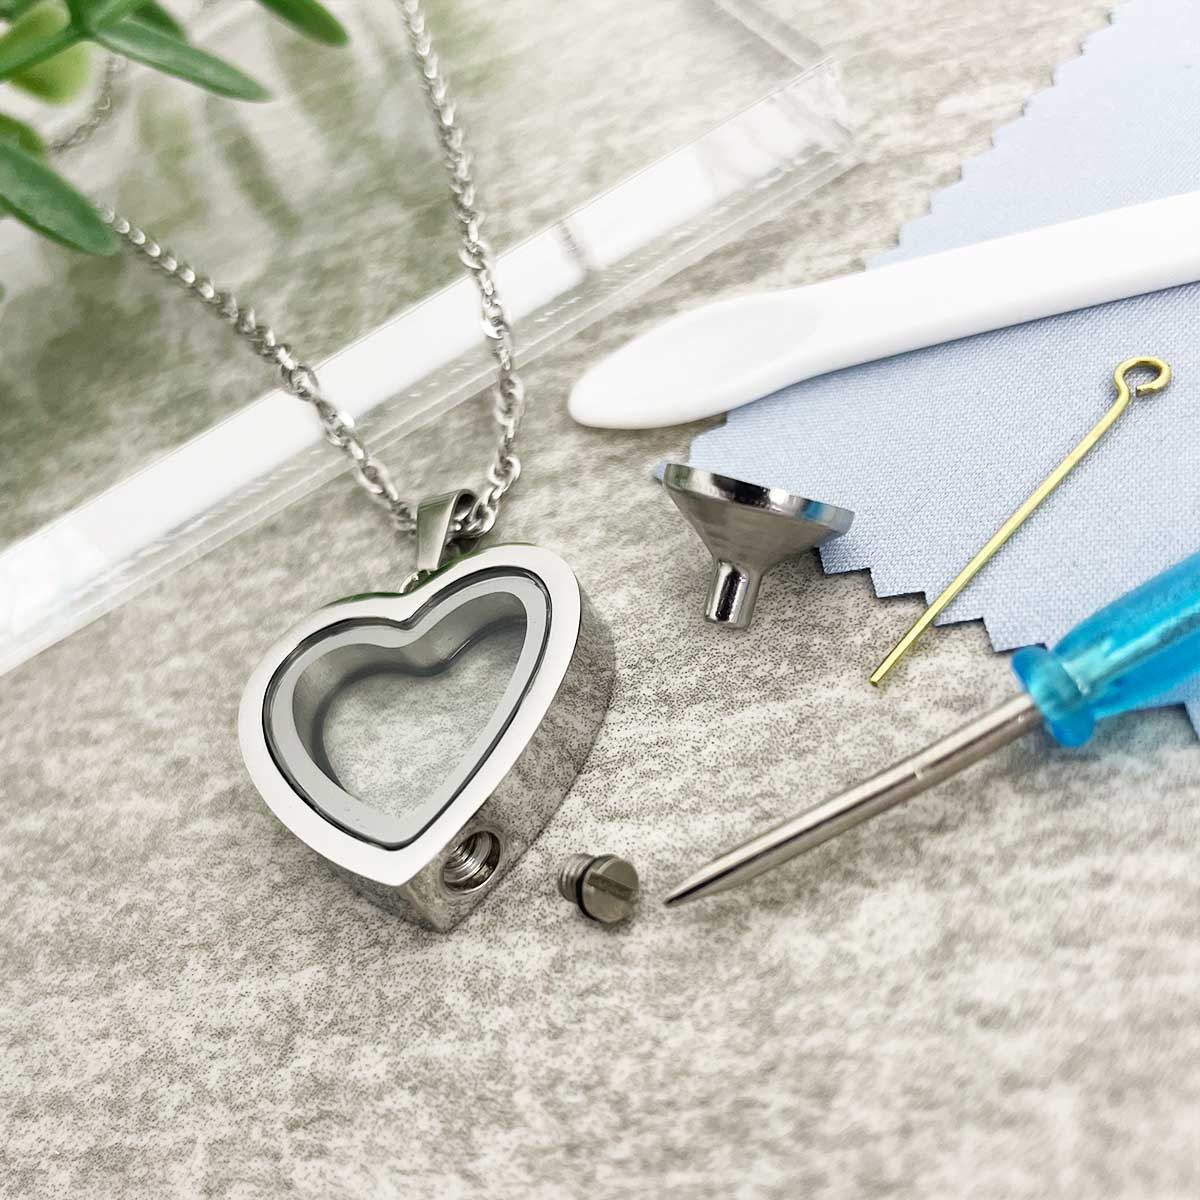 THE HEART OF GOLD LOCKET NECKLACE